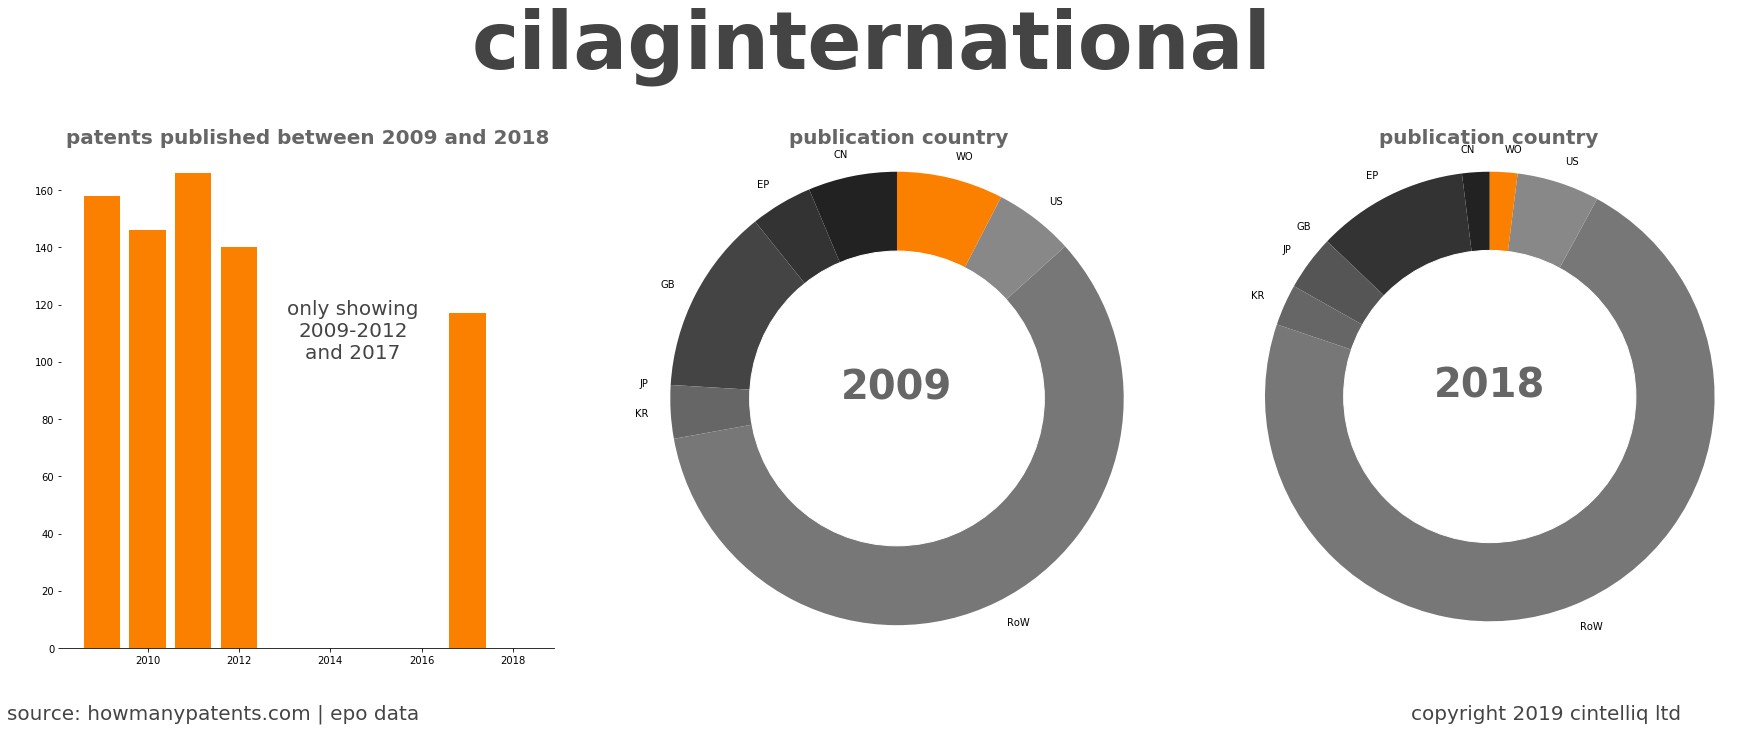 summary of patents for Cilaginternational